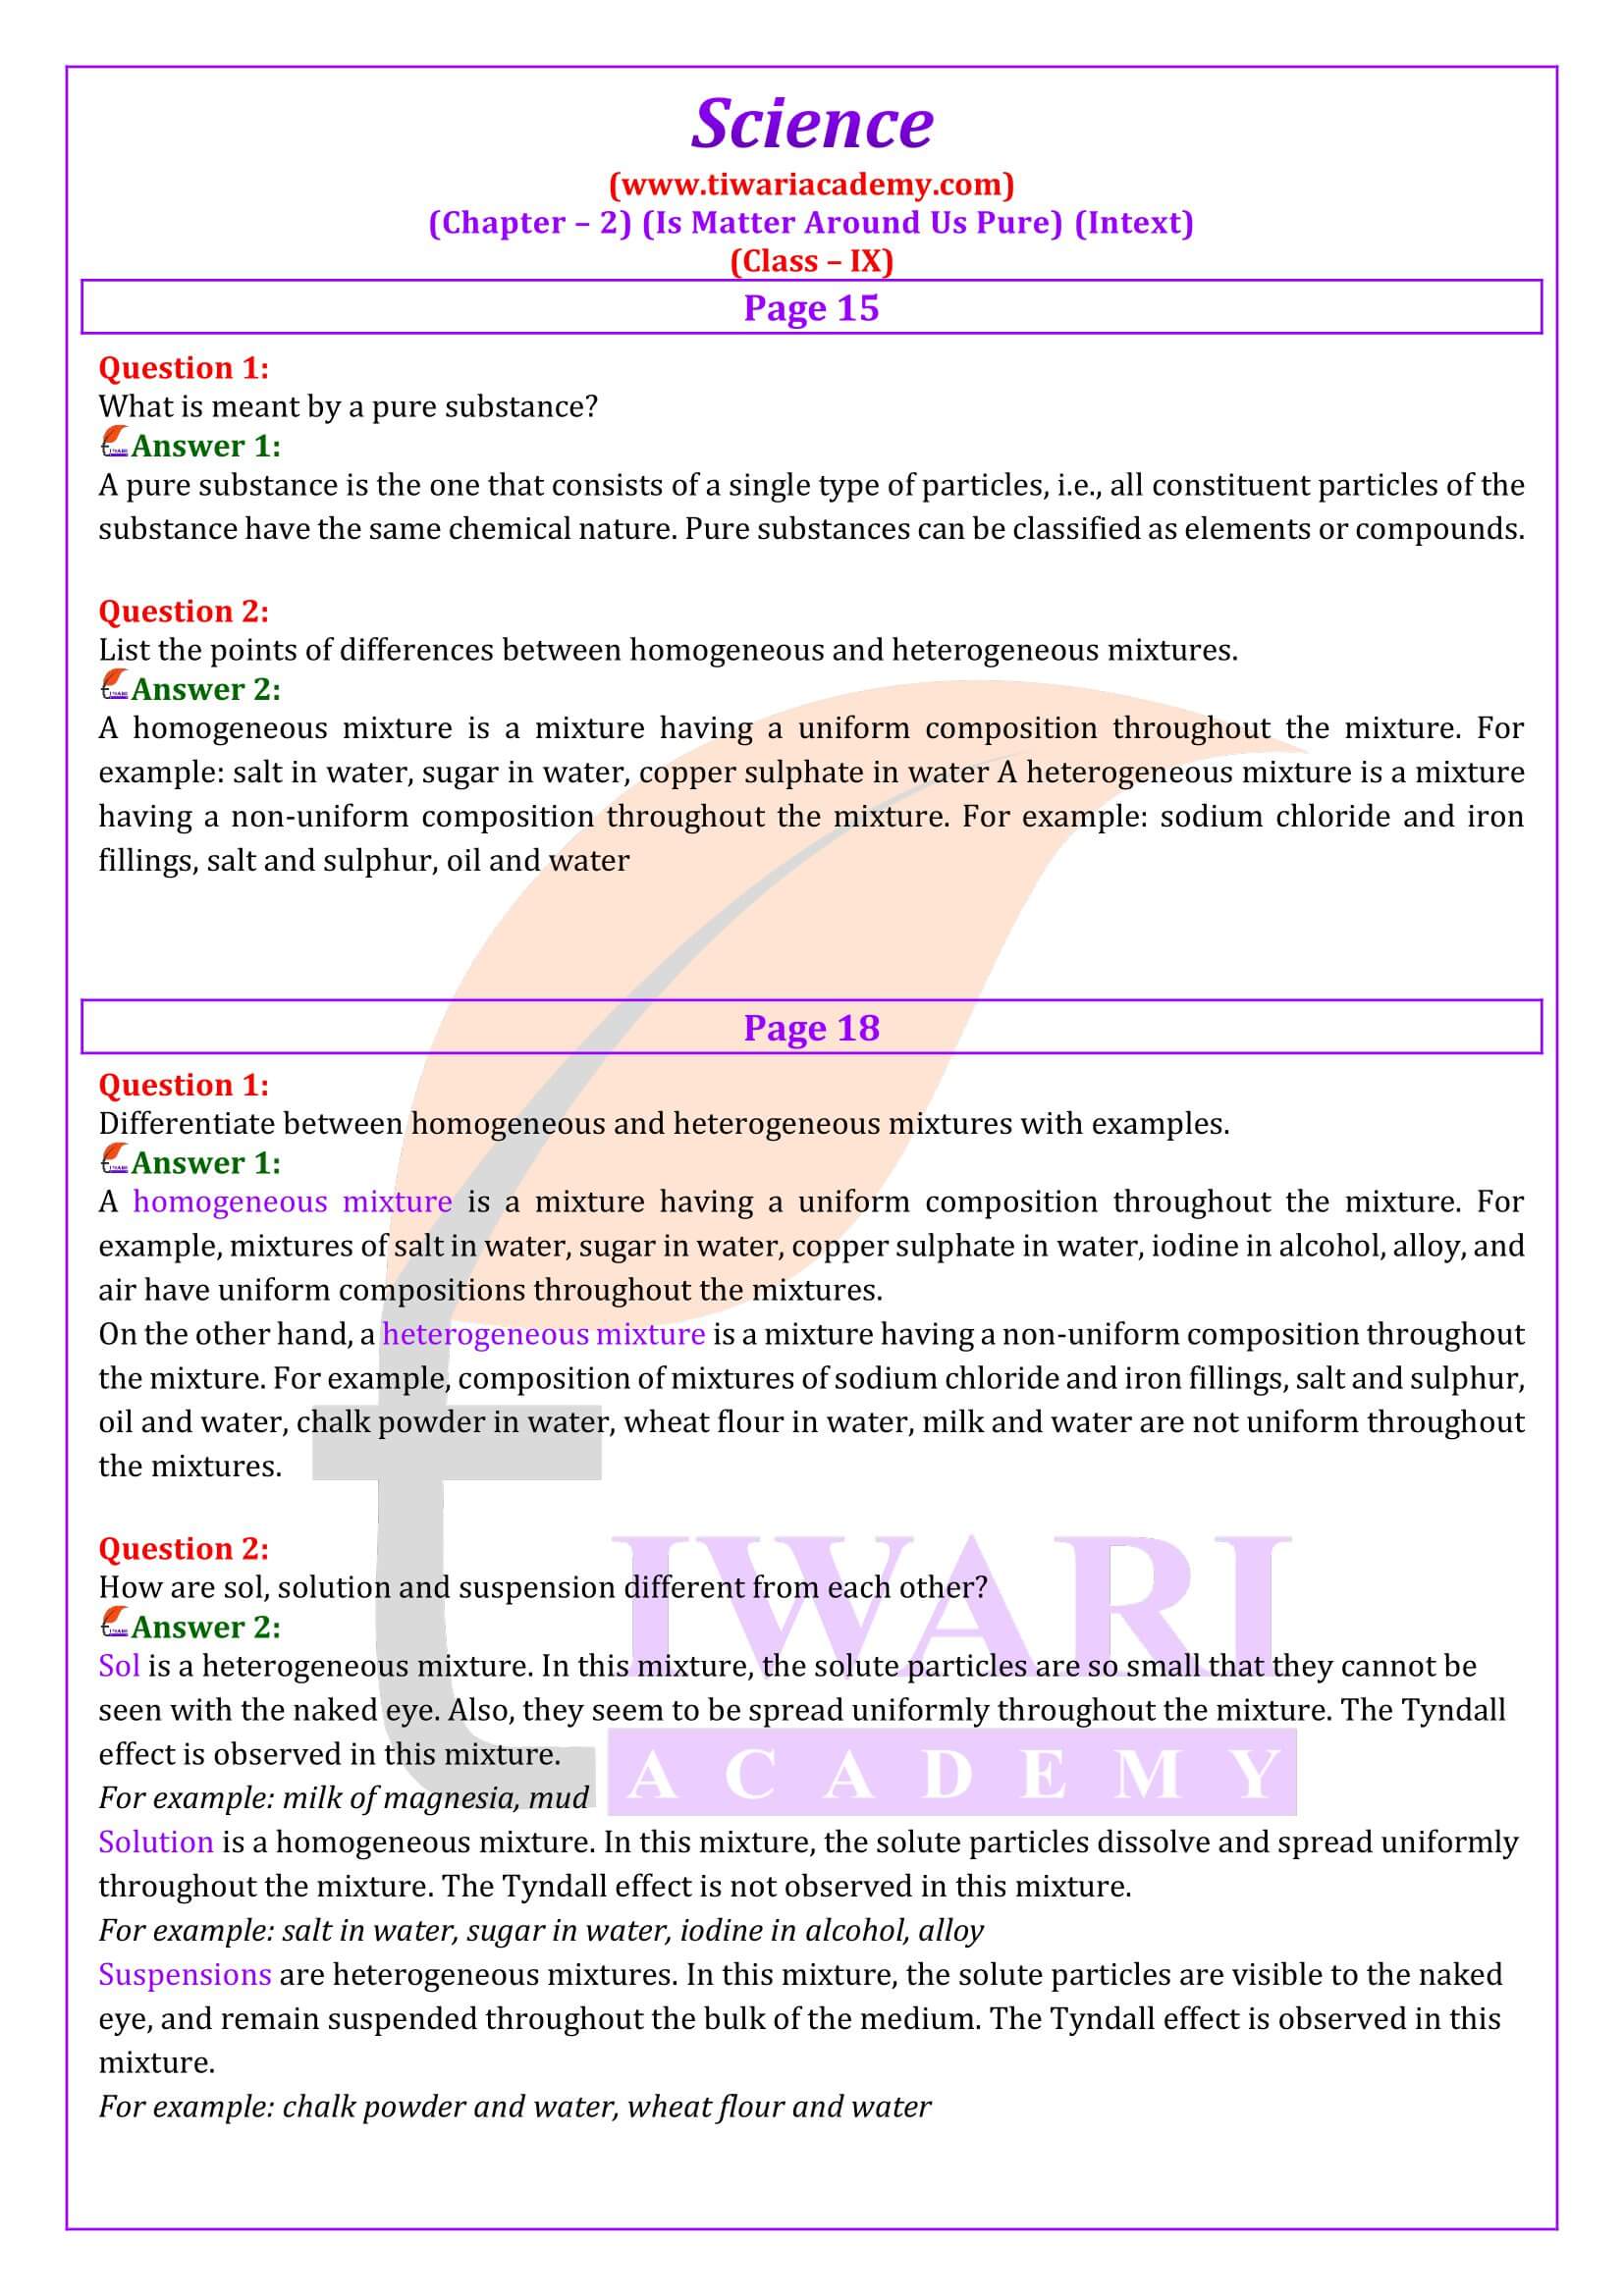 NCERT Solutions for Class 9 Science Chapter 2 Intext Questions